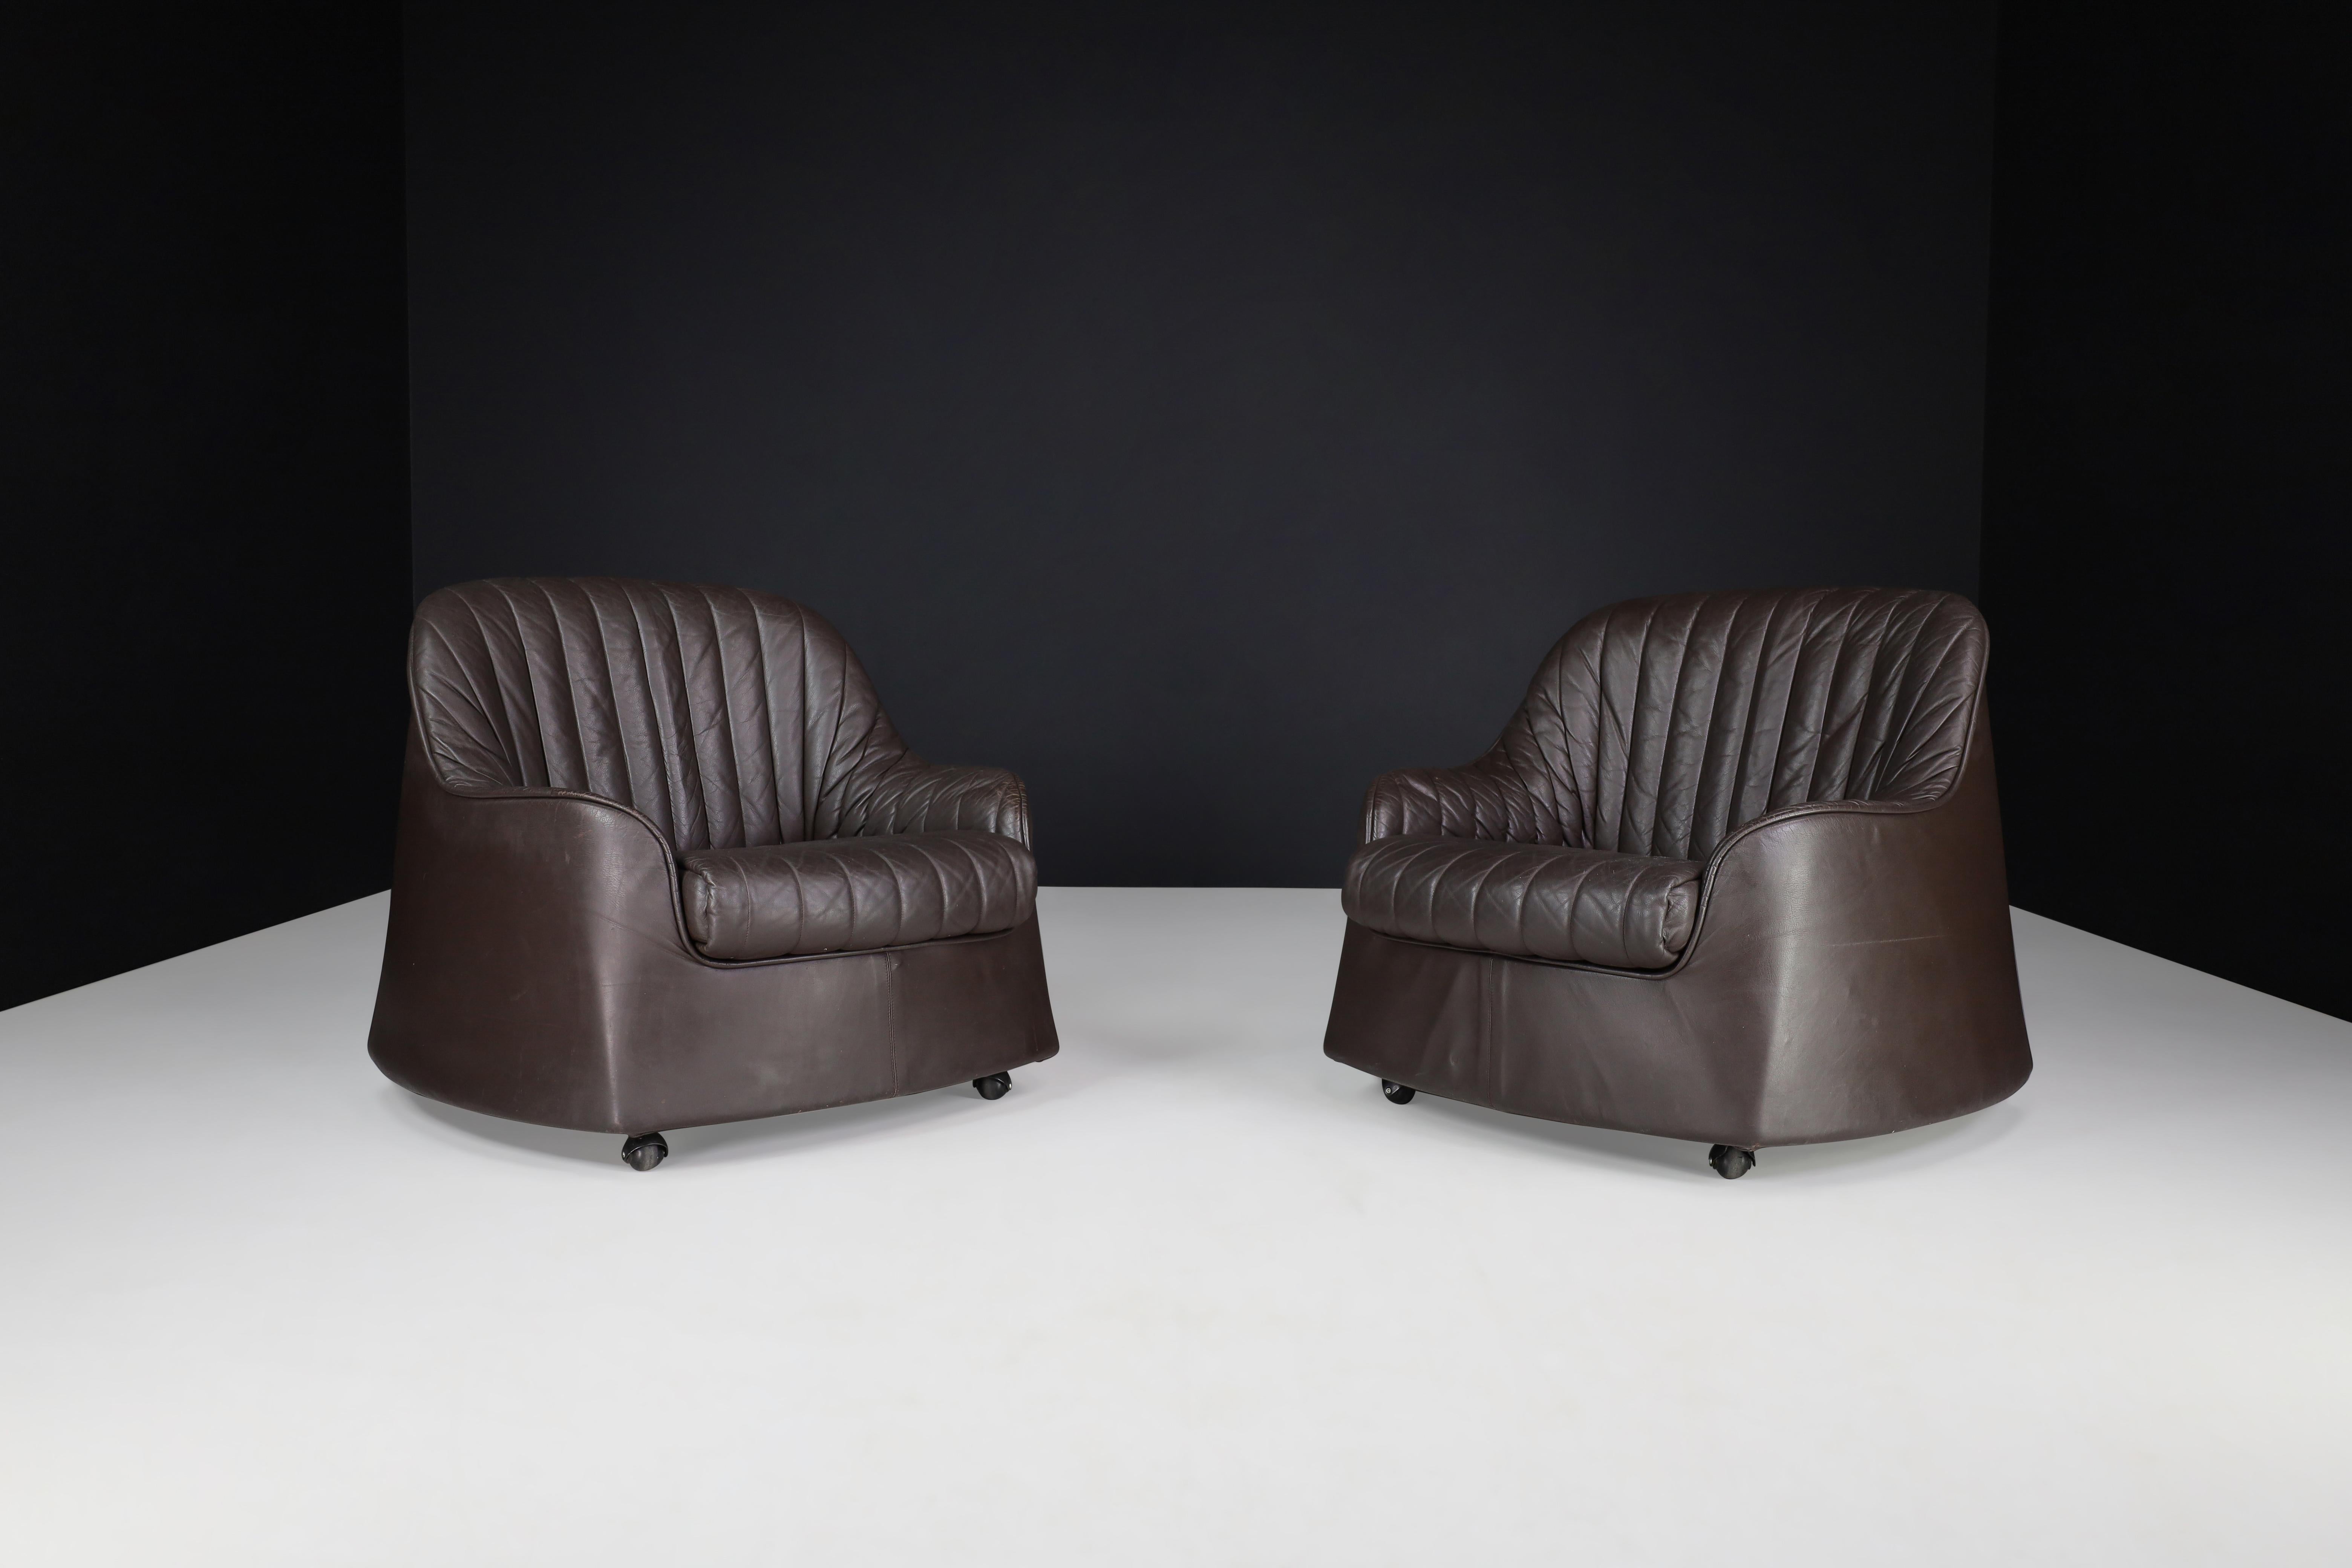 Cassina Ciprea Lounge chairs by Tobia and Afra Scarpa, 1970s, Italy

Beautiful lounge chairs made in Italy by Tobia and Afra Scarpa for Cassina in Italy 1970s. Organic, scooped-out shape and soft, quality leather make these chairs feel as cozy as